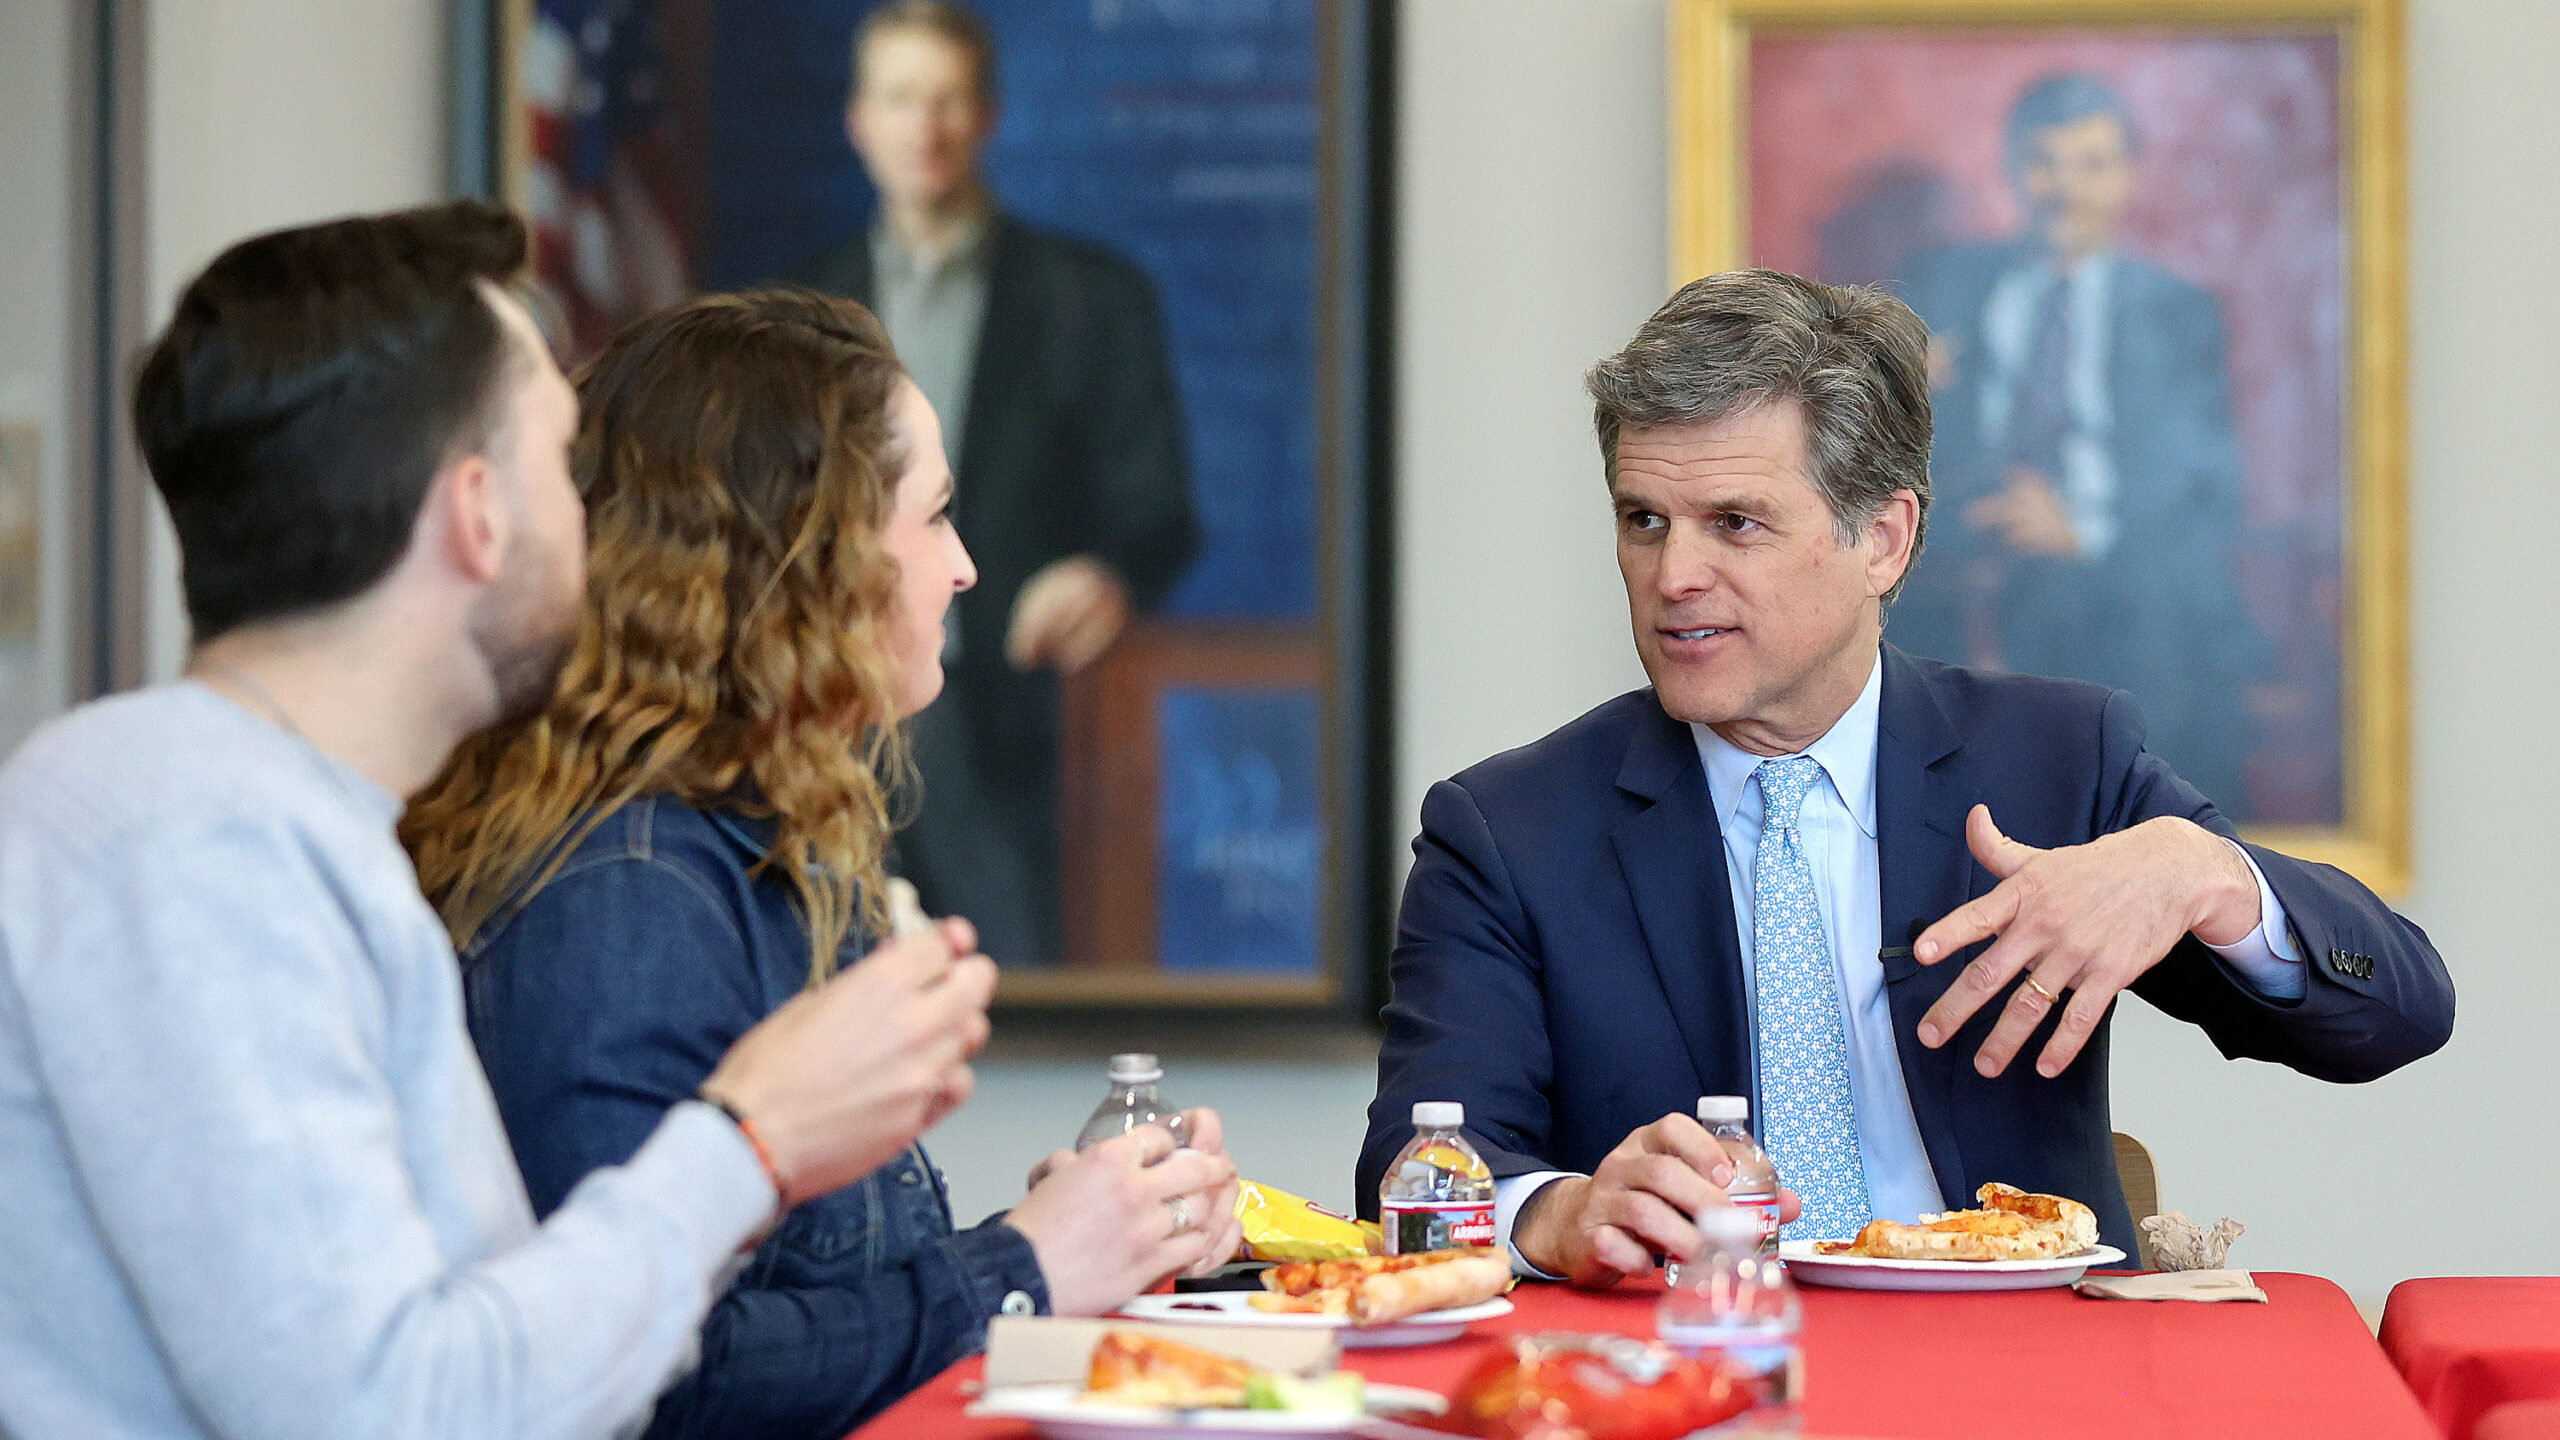 University of Utah impact scholar Tim Shriver, right, meets with members of Students for Dignity, i...